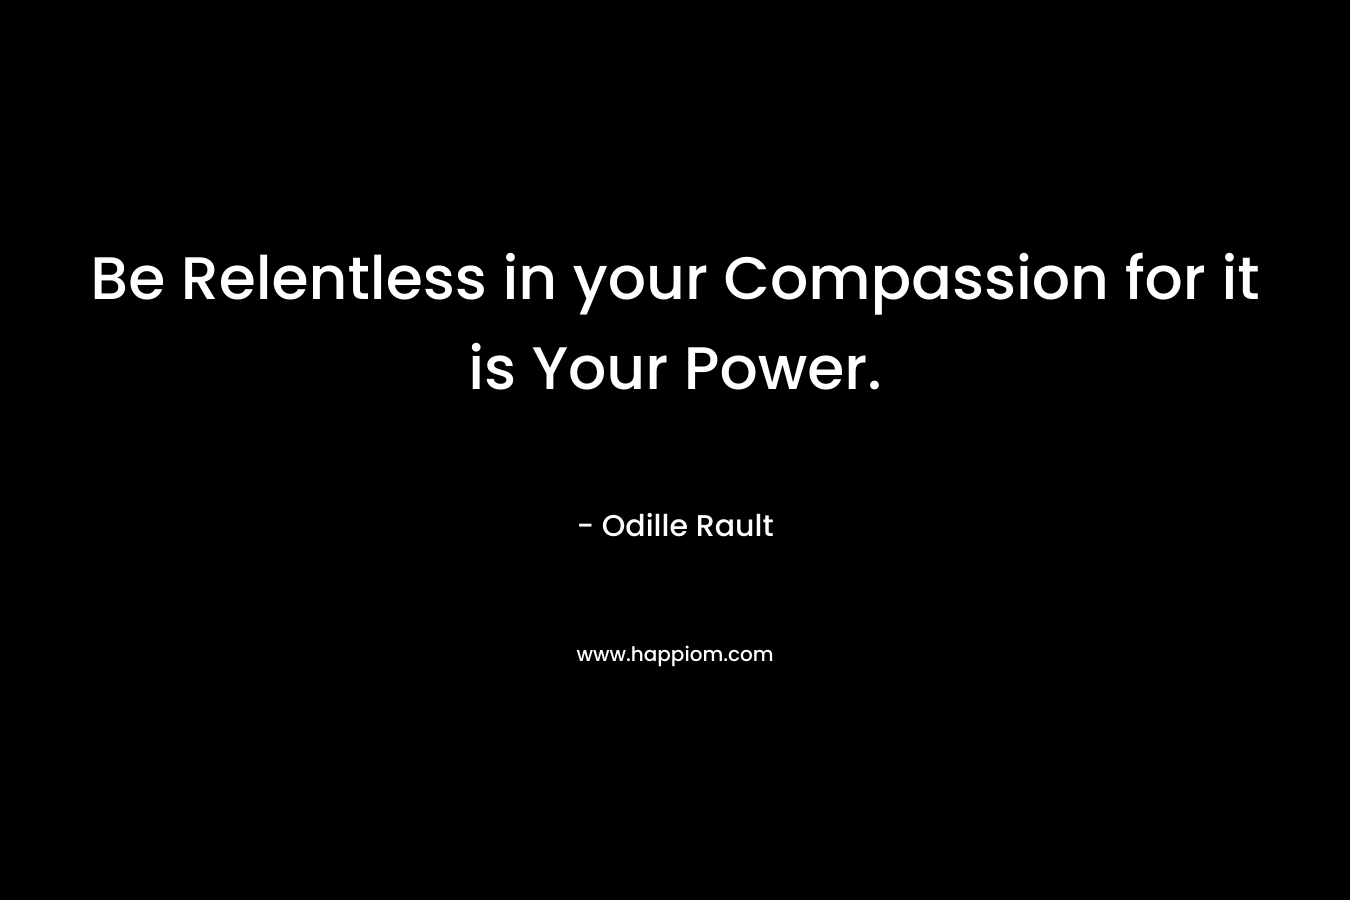 Be Relentless in your Compassion for it is Your Power.